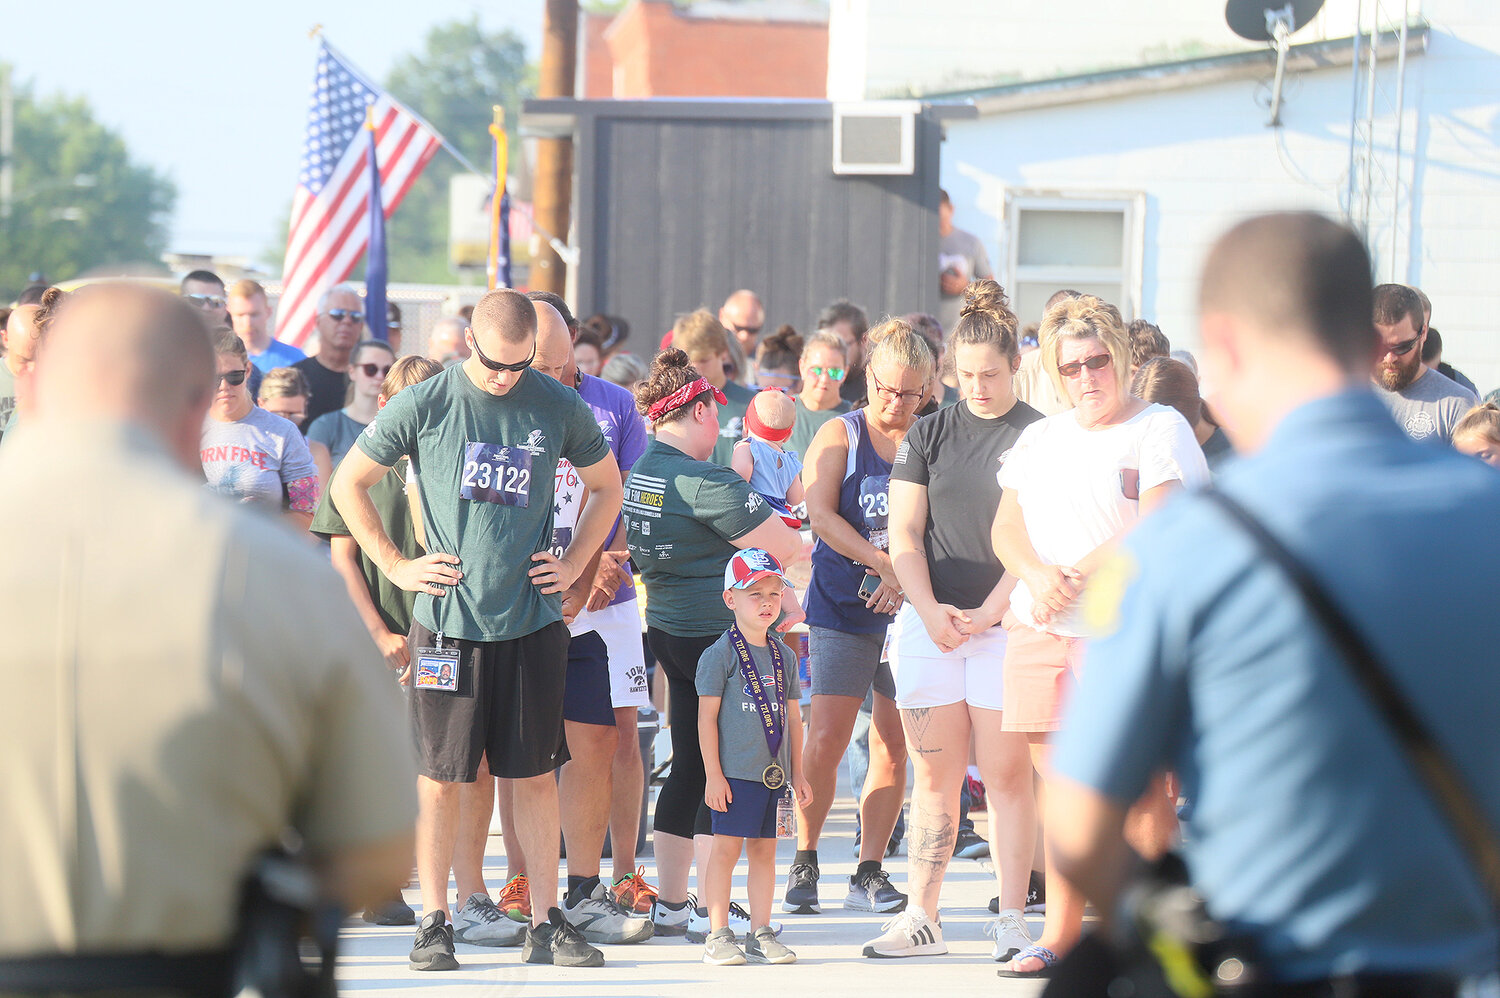 Runners bow for a prayer before the start of the Tunnel to Towers 5K run in Donnellson Tuesday morning.